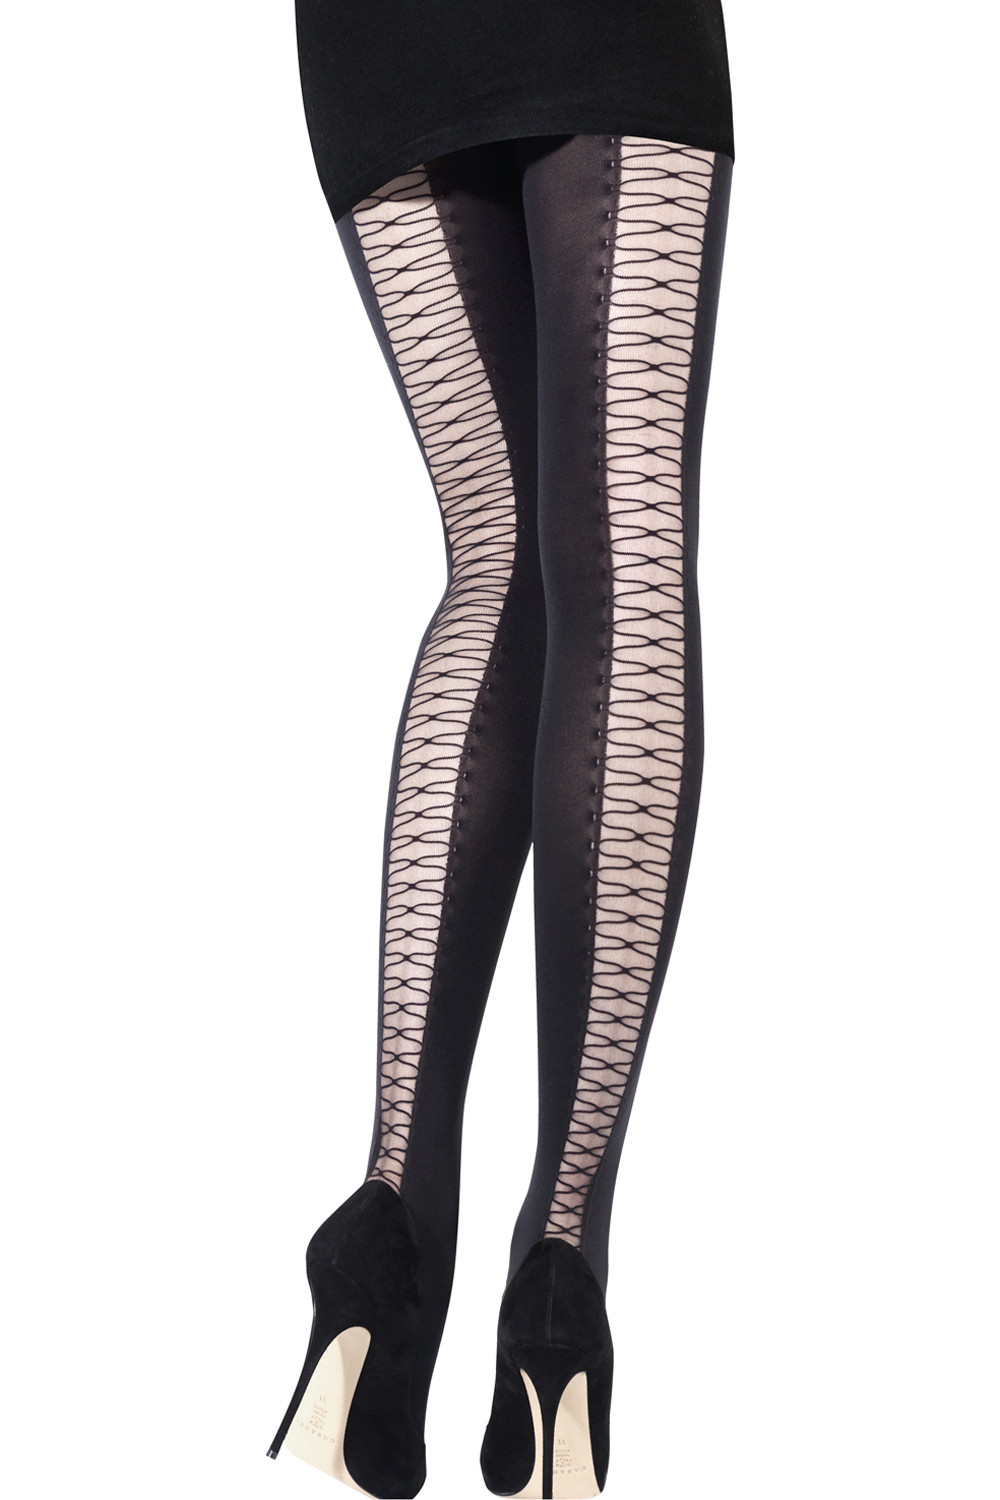 Two Toned Vertical Stripes Tights, Timeless Styles, Women